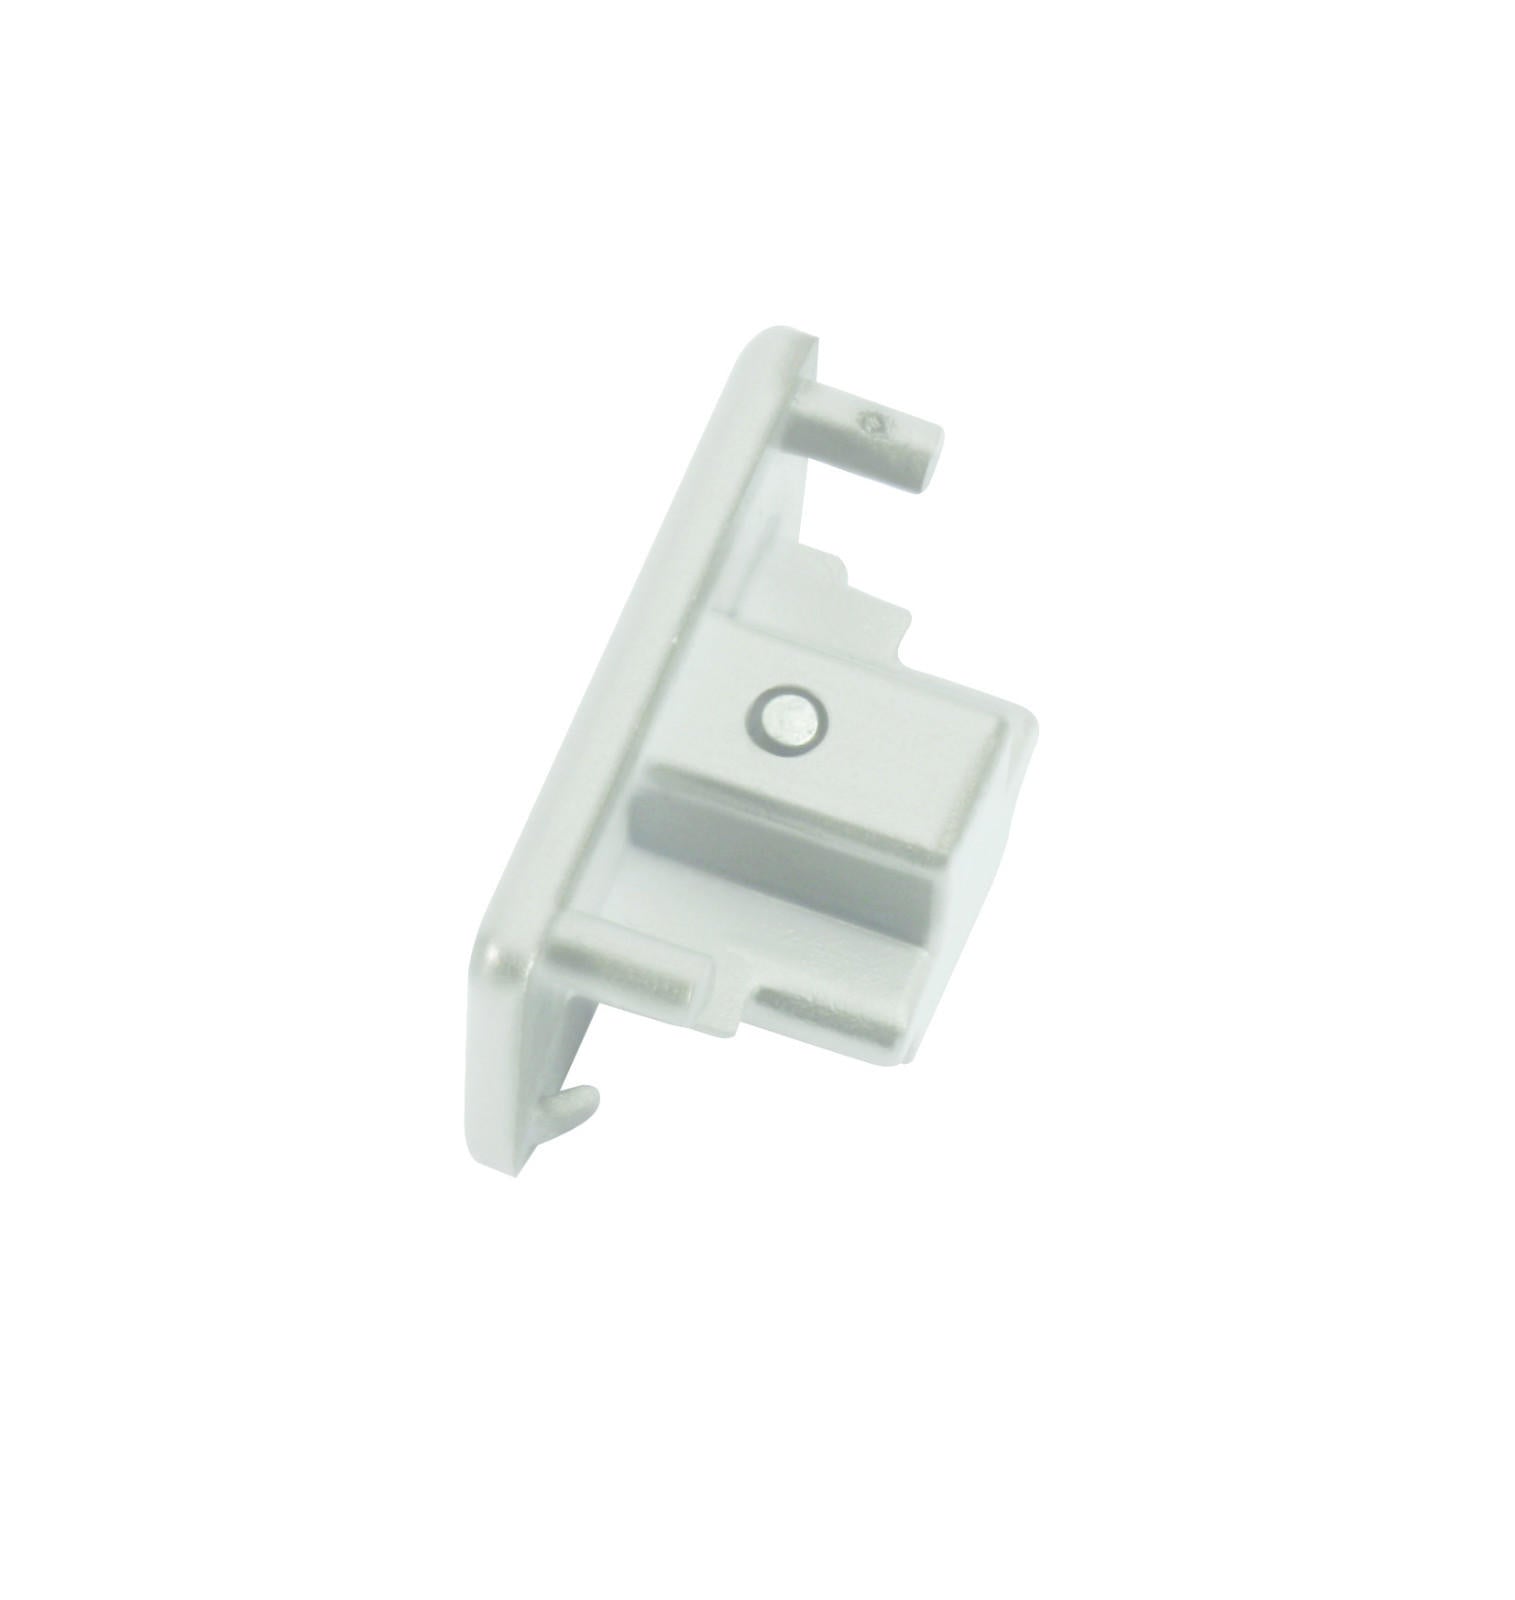 ML Accessories-TRKDEW 230V Single Circuit Track Dead End Cap - White